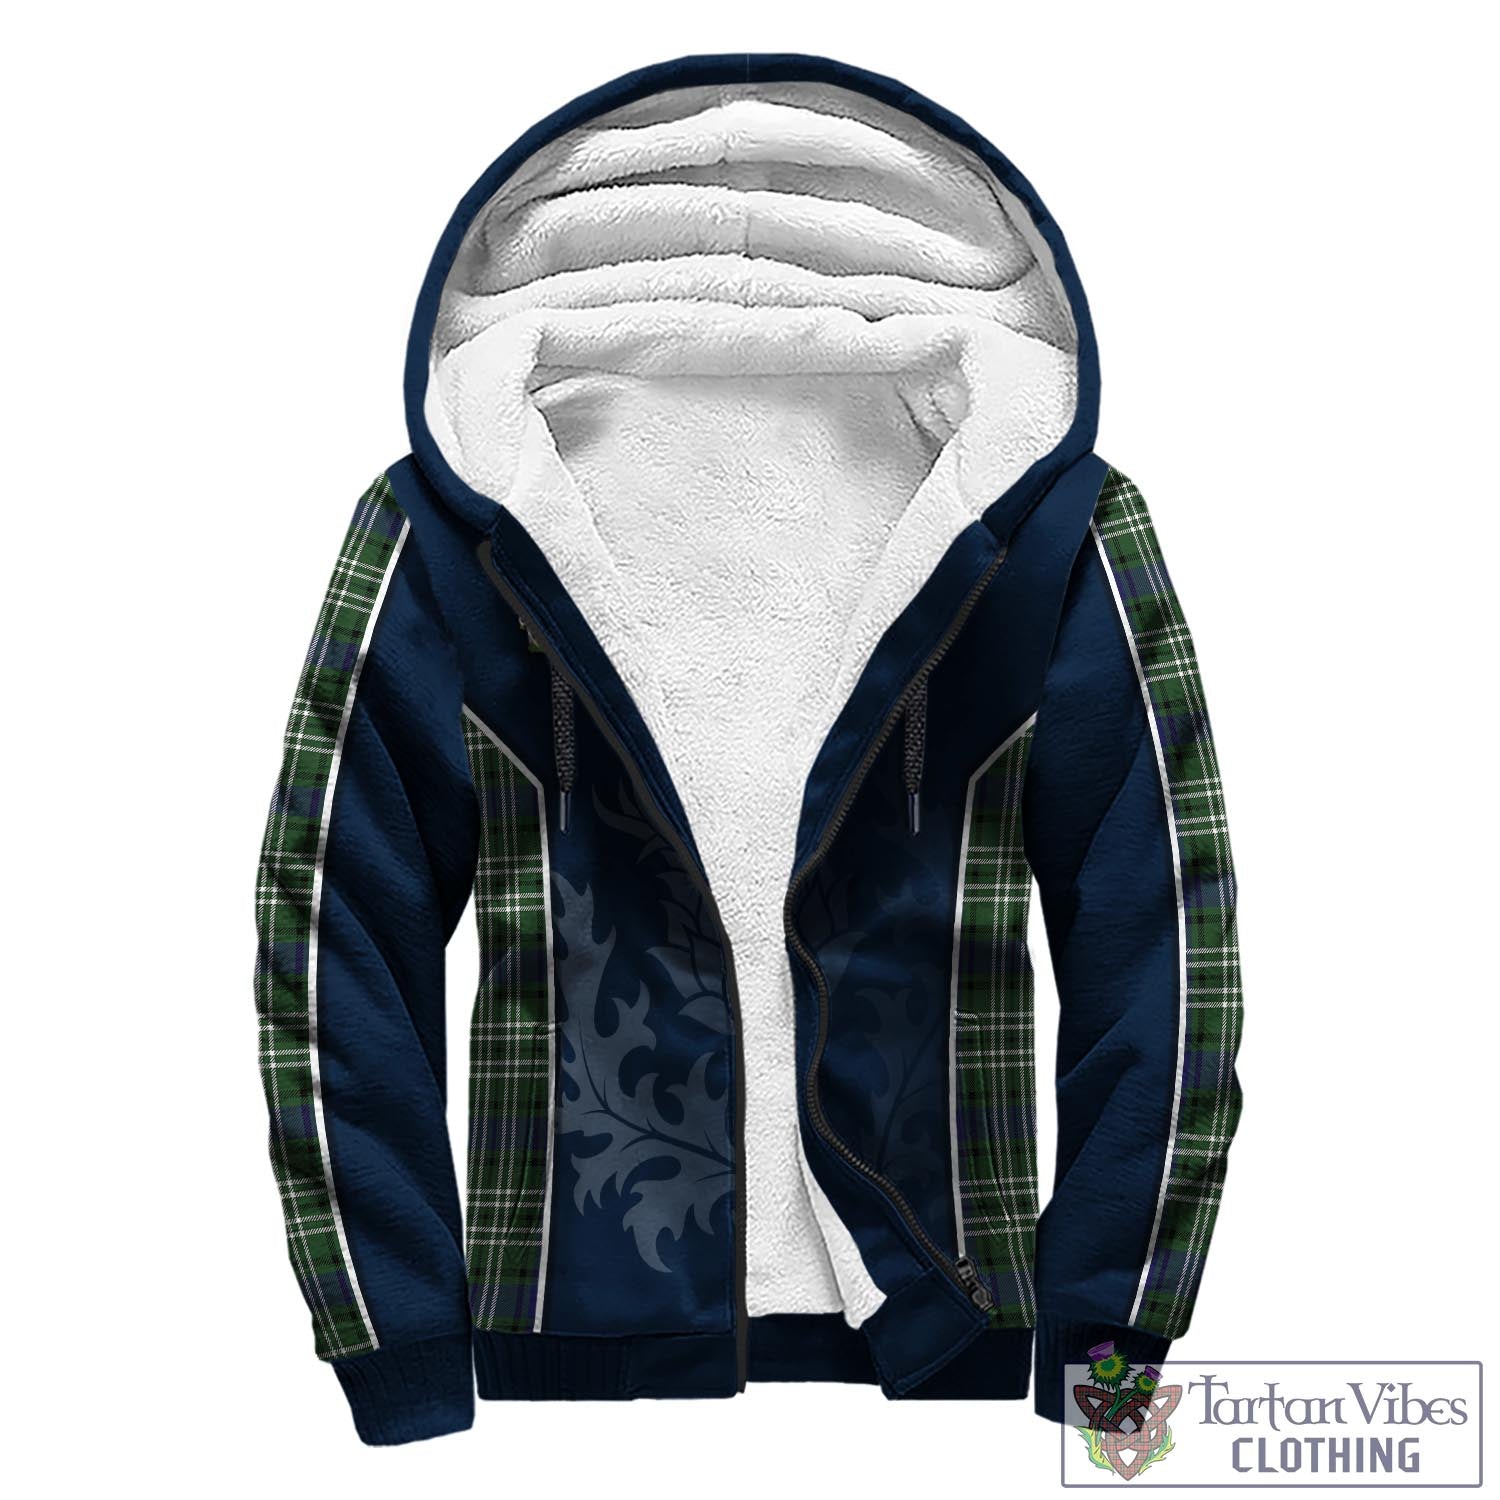 Tartan Vibes Clothing Blyth Tartan Sherpa Hoodie with Family Crest and Scottish Thistle Vibes Sport Style